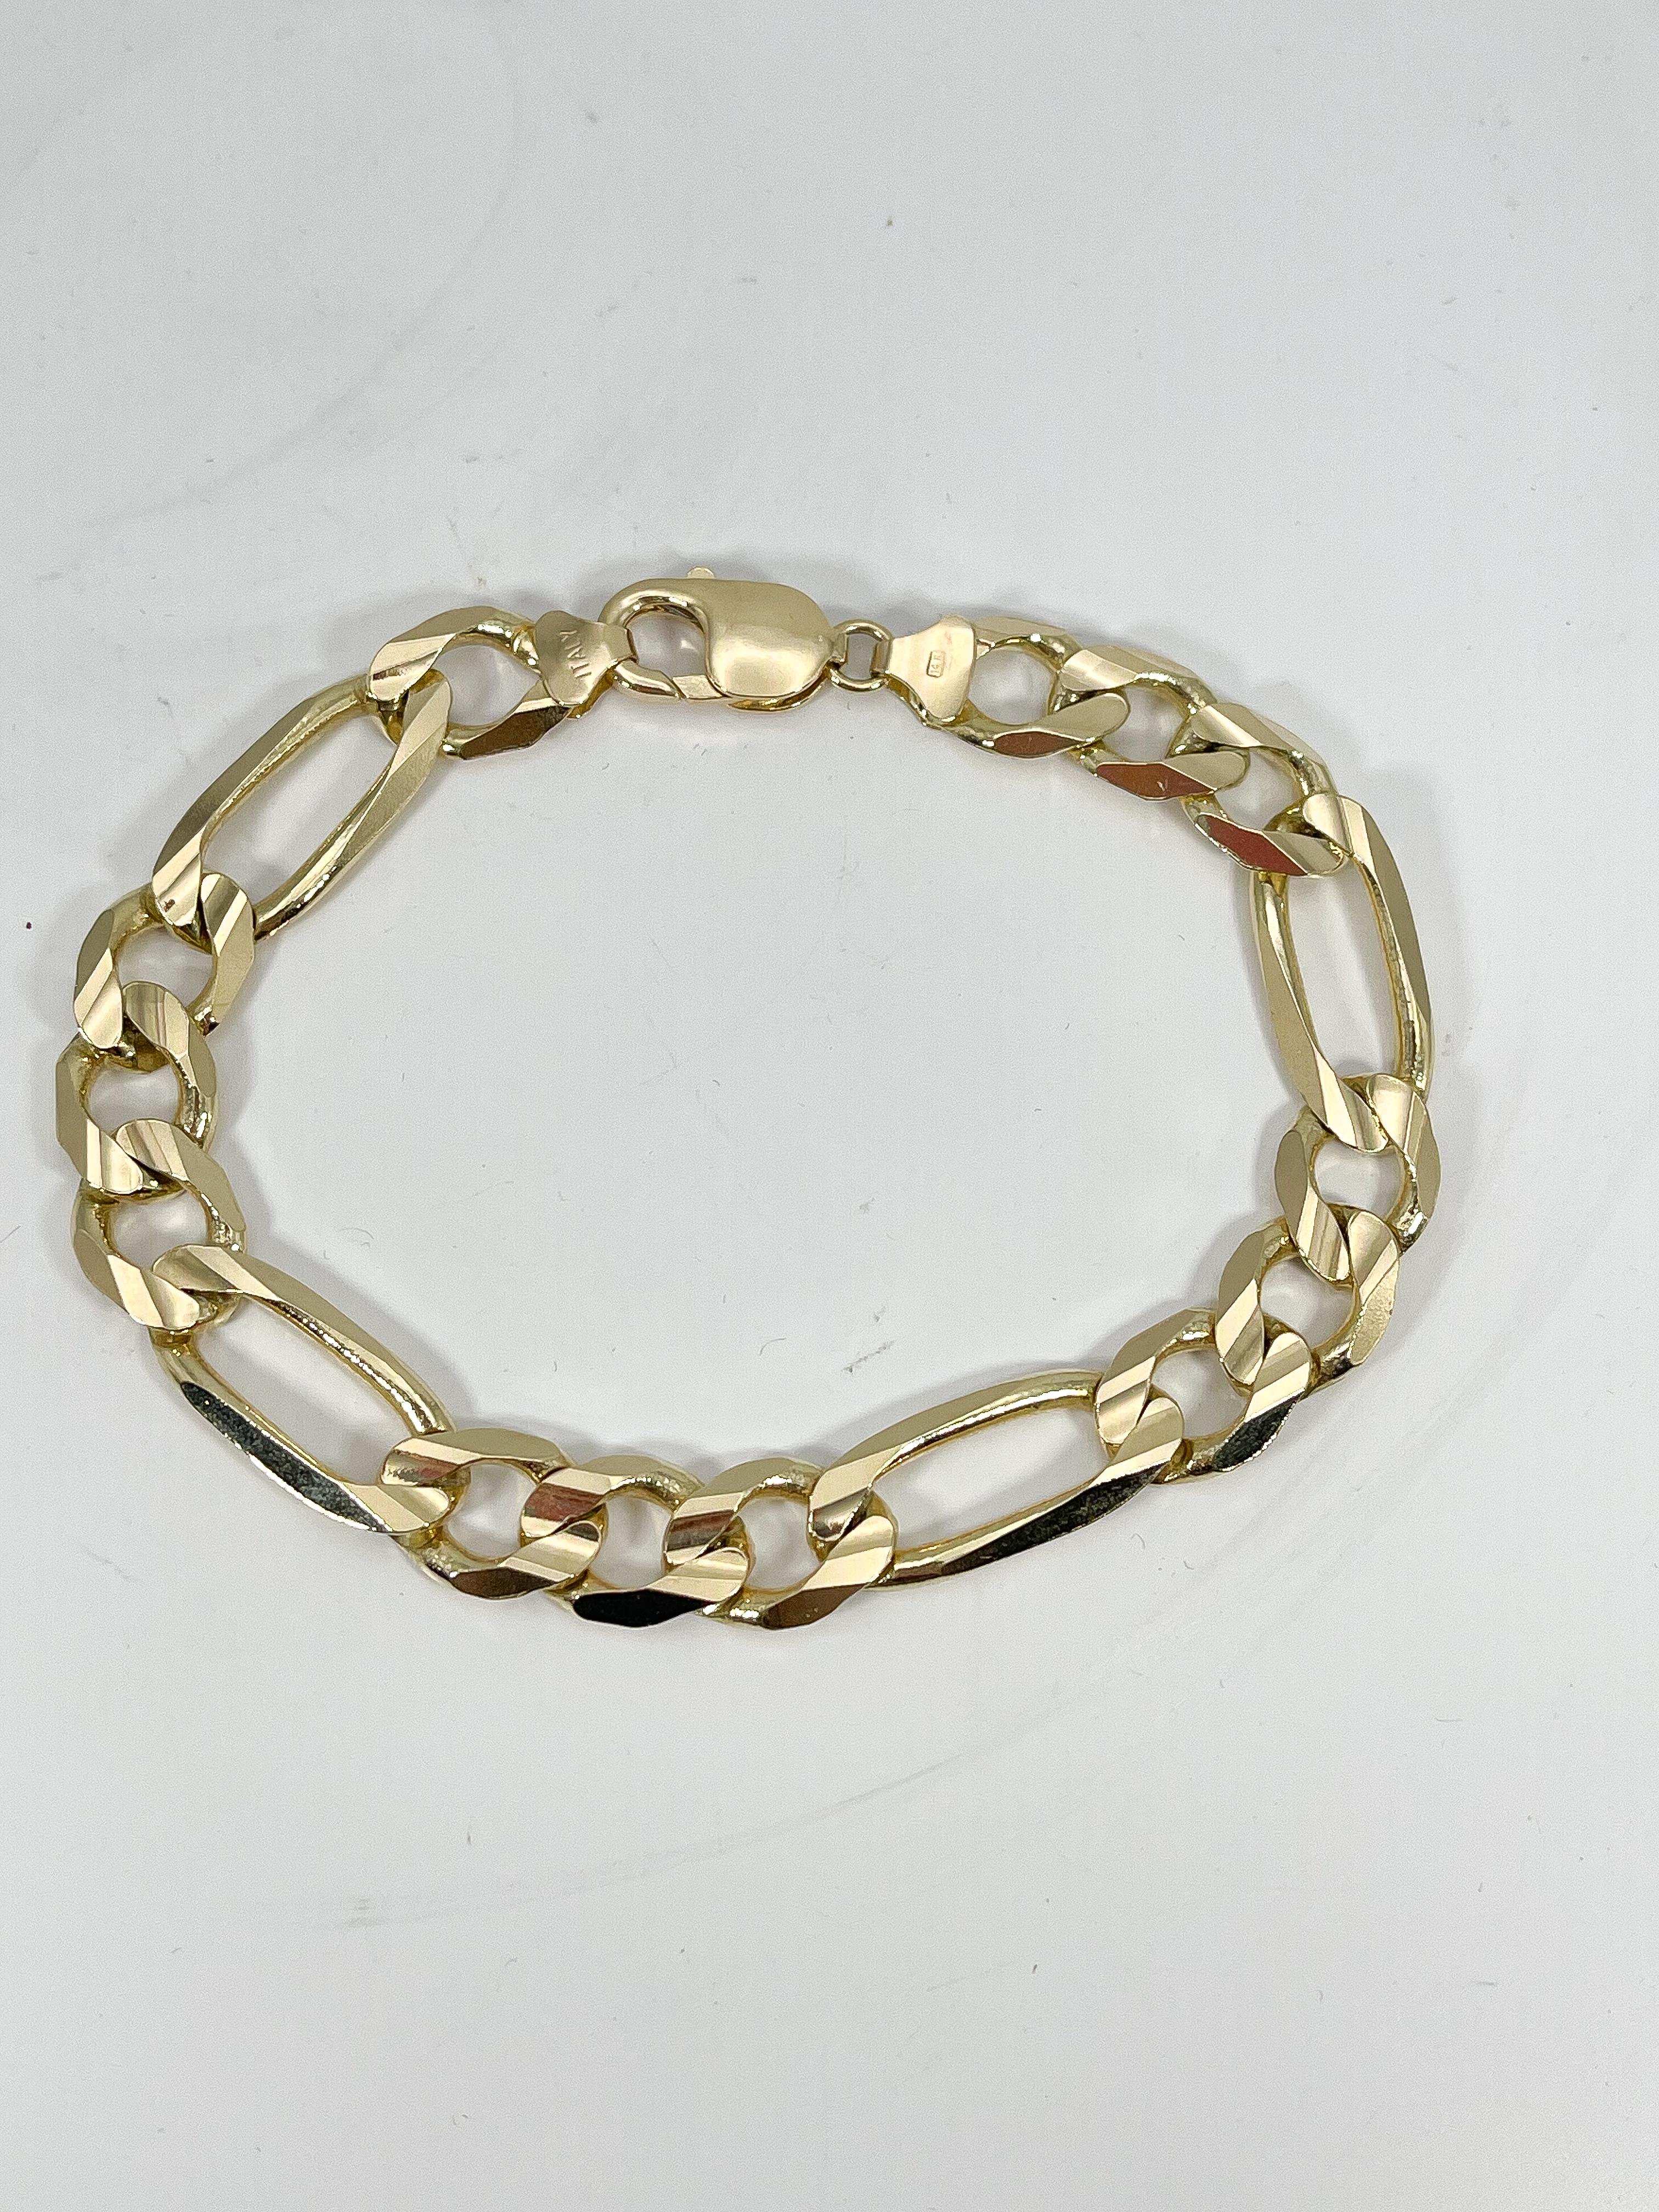 14k yellow gold men's heavy figuero bracelet. The length of this bracelet is 8 1/2 inches, the width measures 9.8 mm, has a lobster clasp to open and close, and it has a total weight of 27.3 grams.